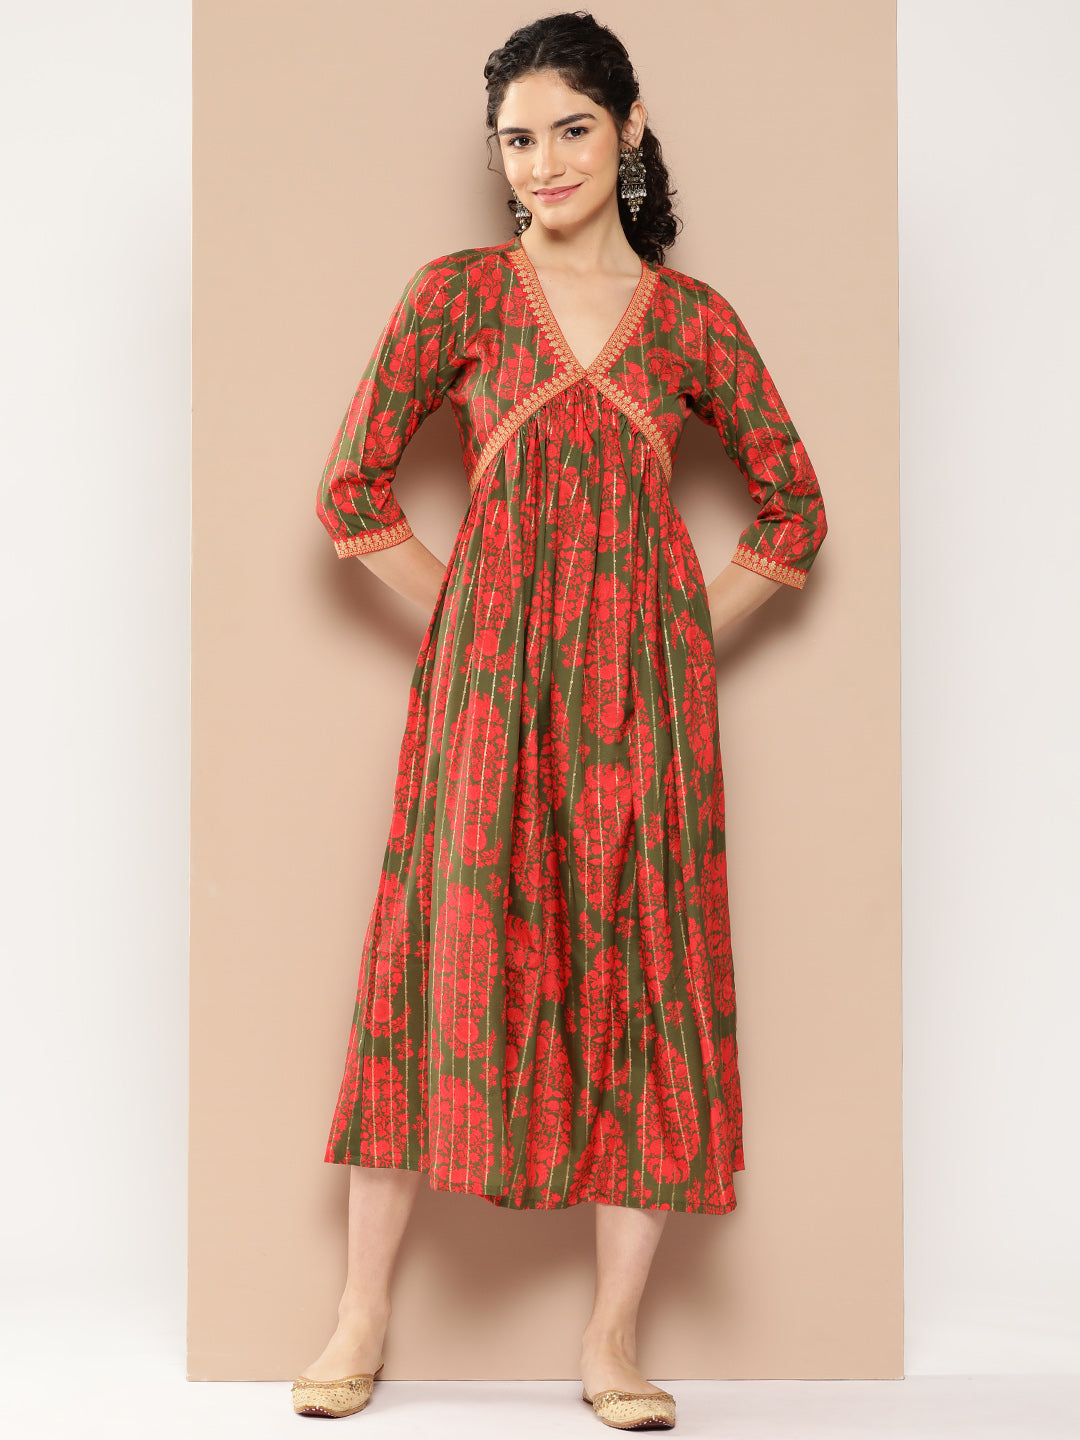 Green & Red Floral Print Flared A-Line Midi Dress